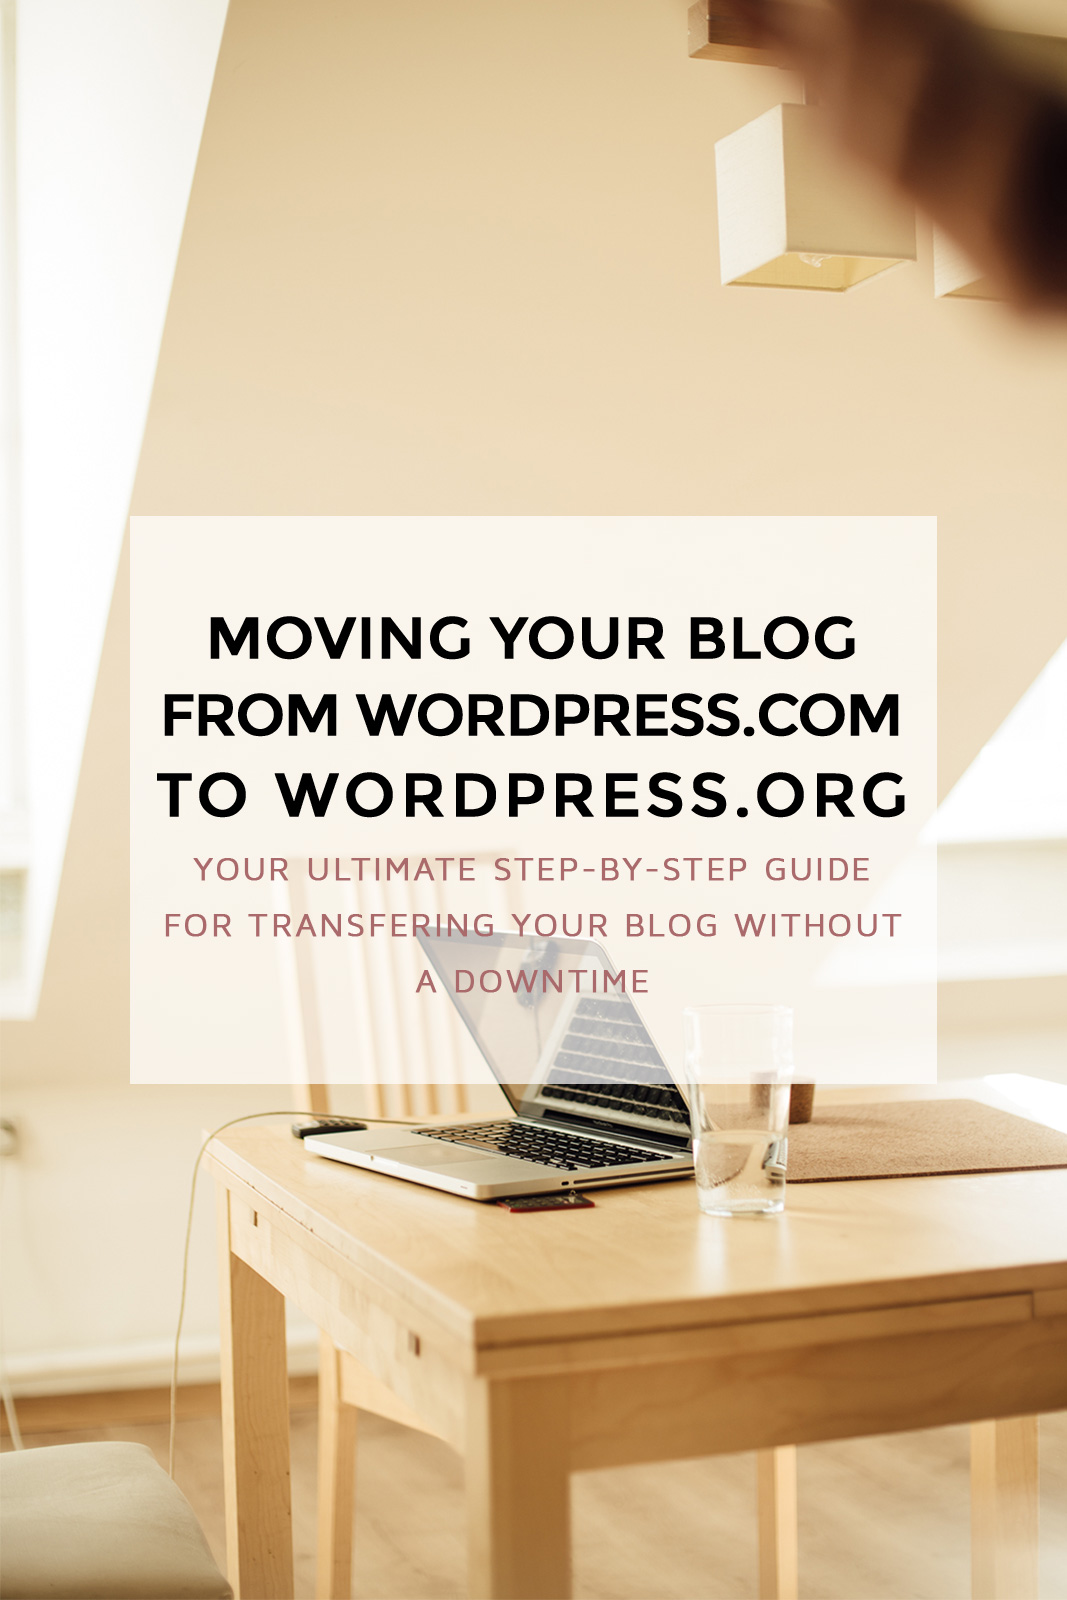 Moving to self-hosted Wordpress.org can be the best thing you can ever do for your blog! Click through to follow step-by-step process on moving your content from Wordpress.com to Wordpress.org (wordpress, blogging tips, blog tips, blogging for money, wordpress blog)